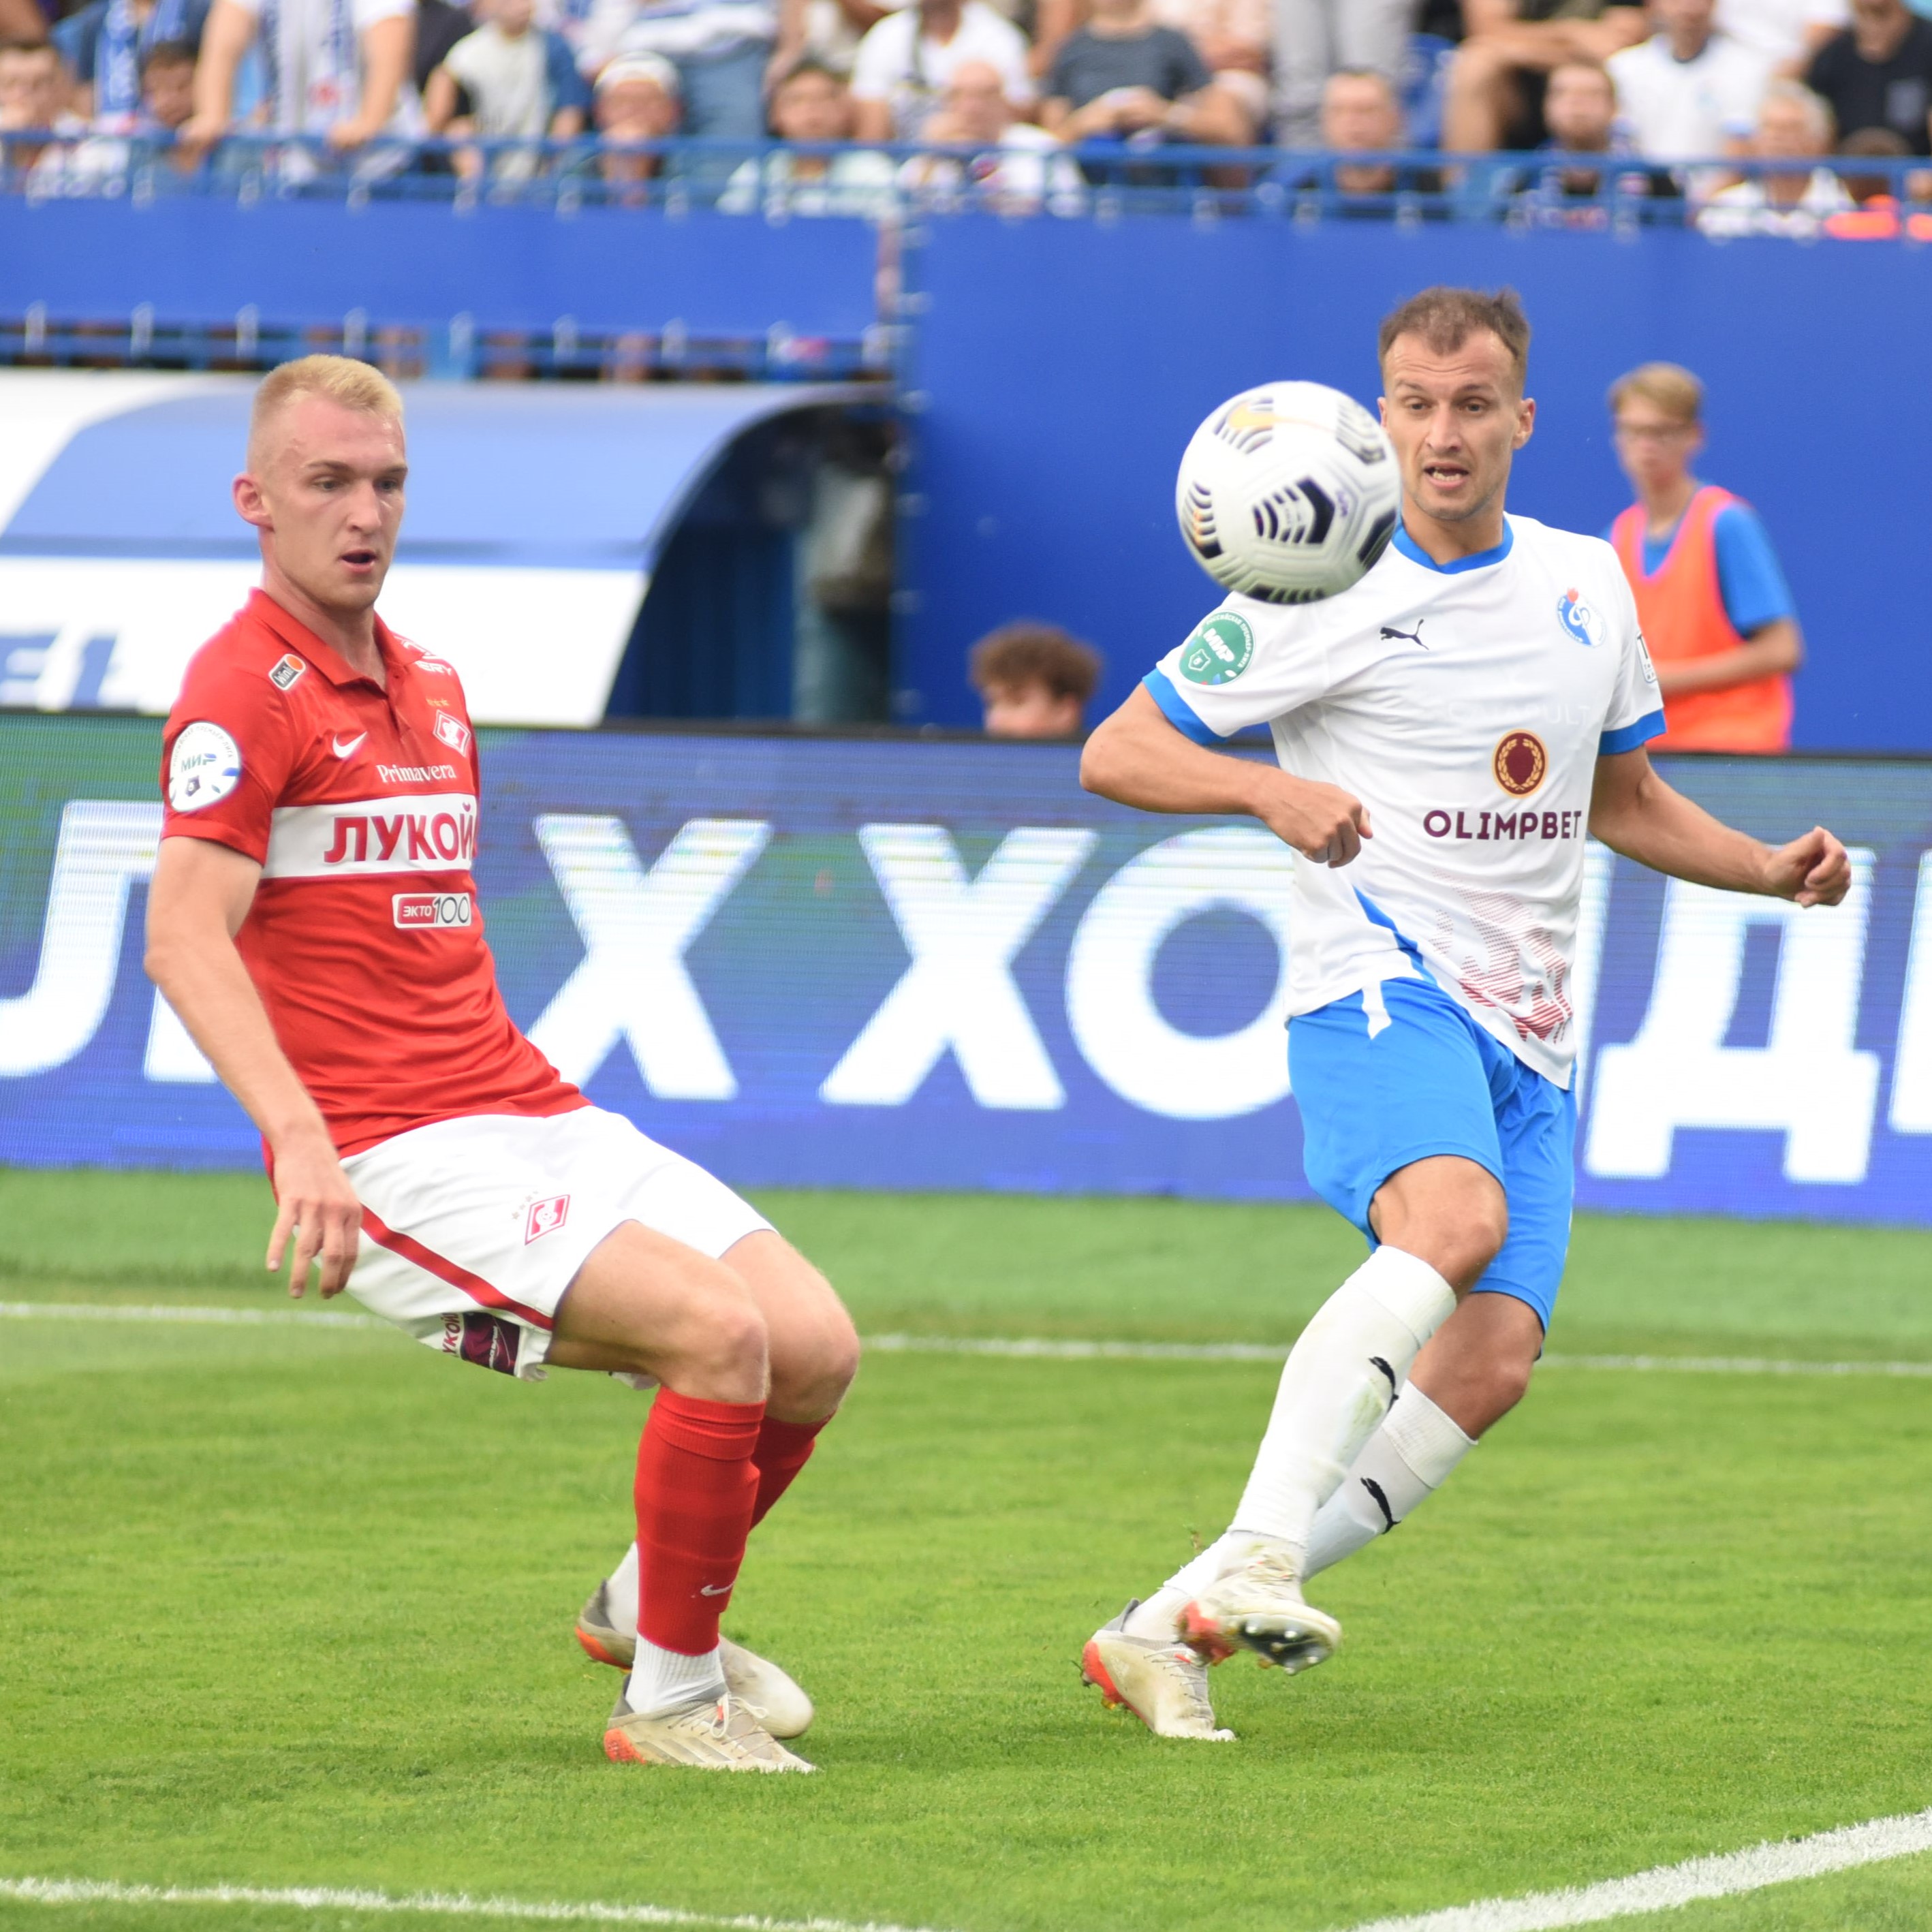 Spartak get the win against Fakel after four-goal performance